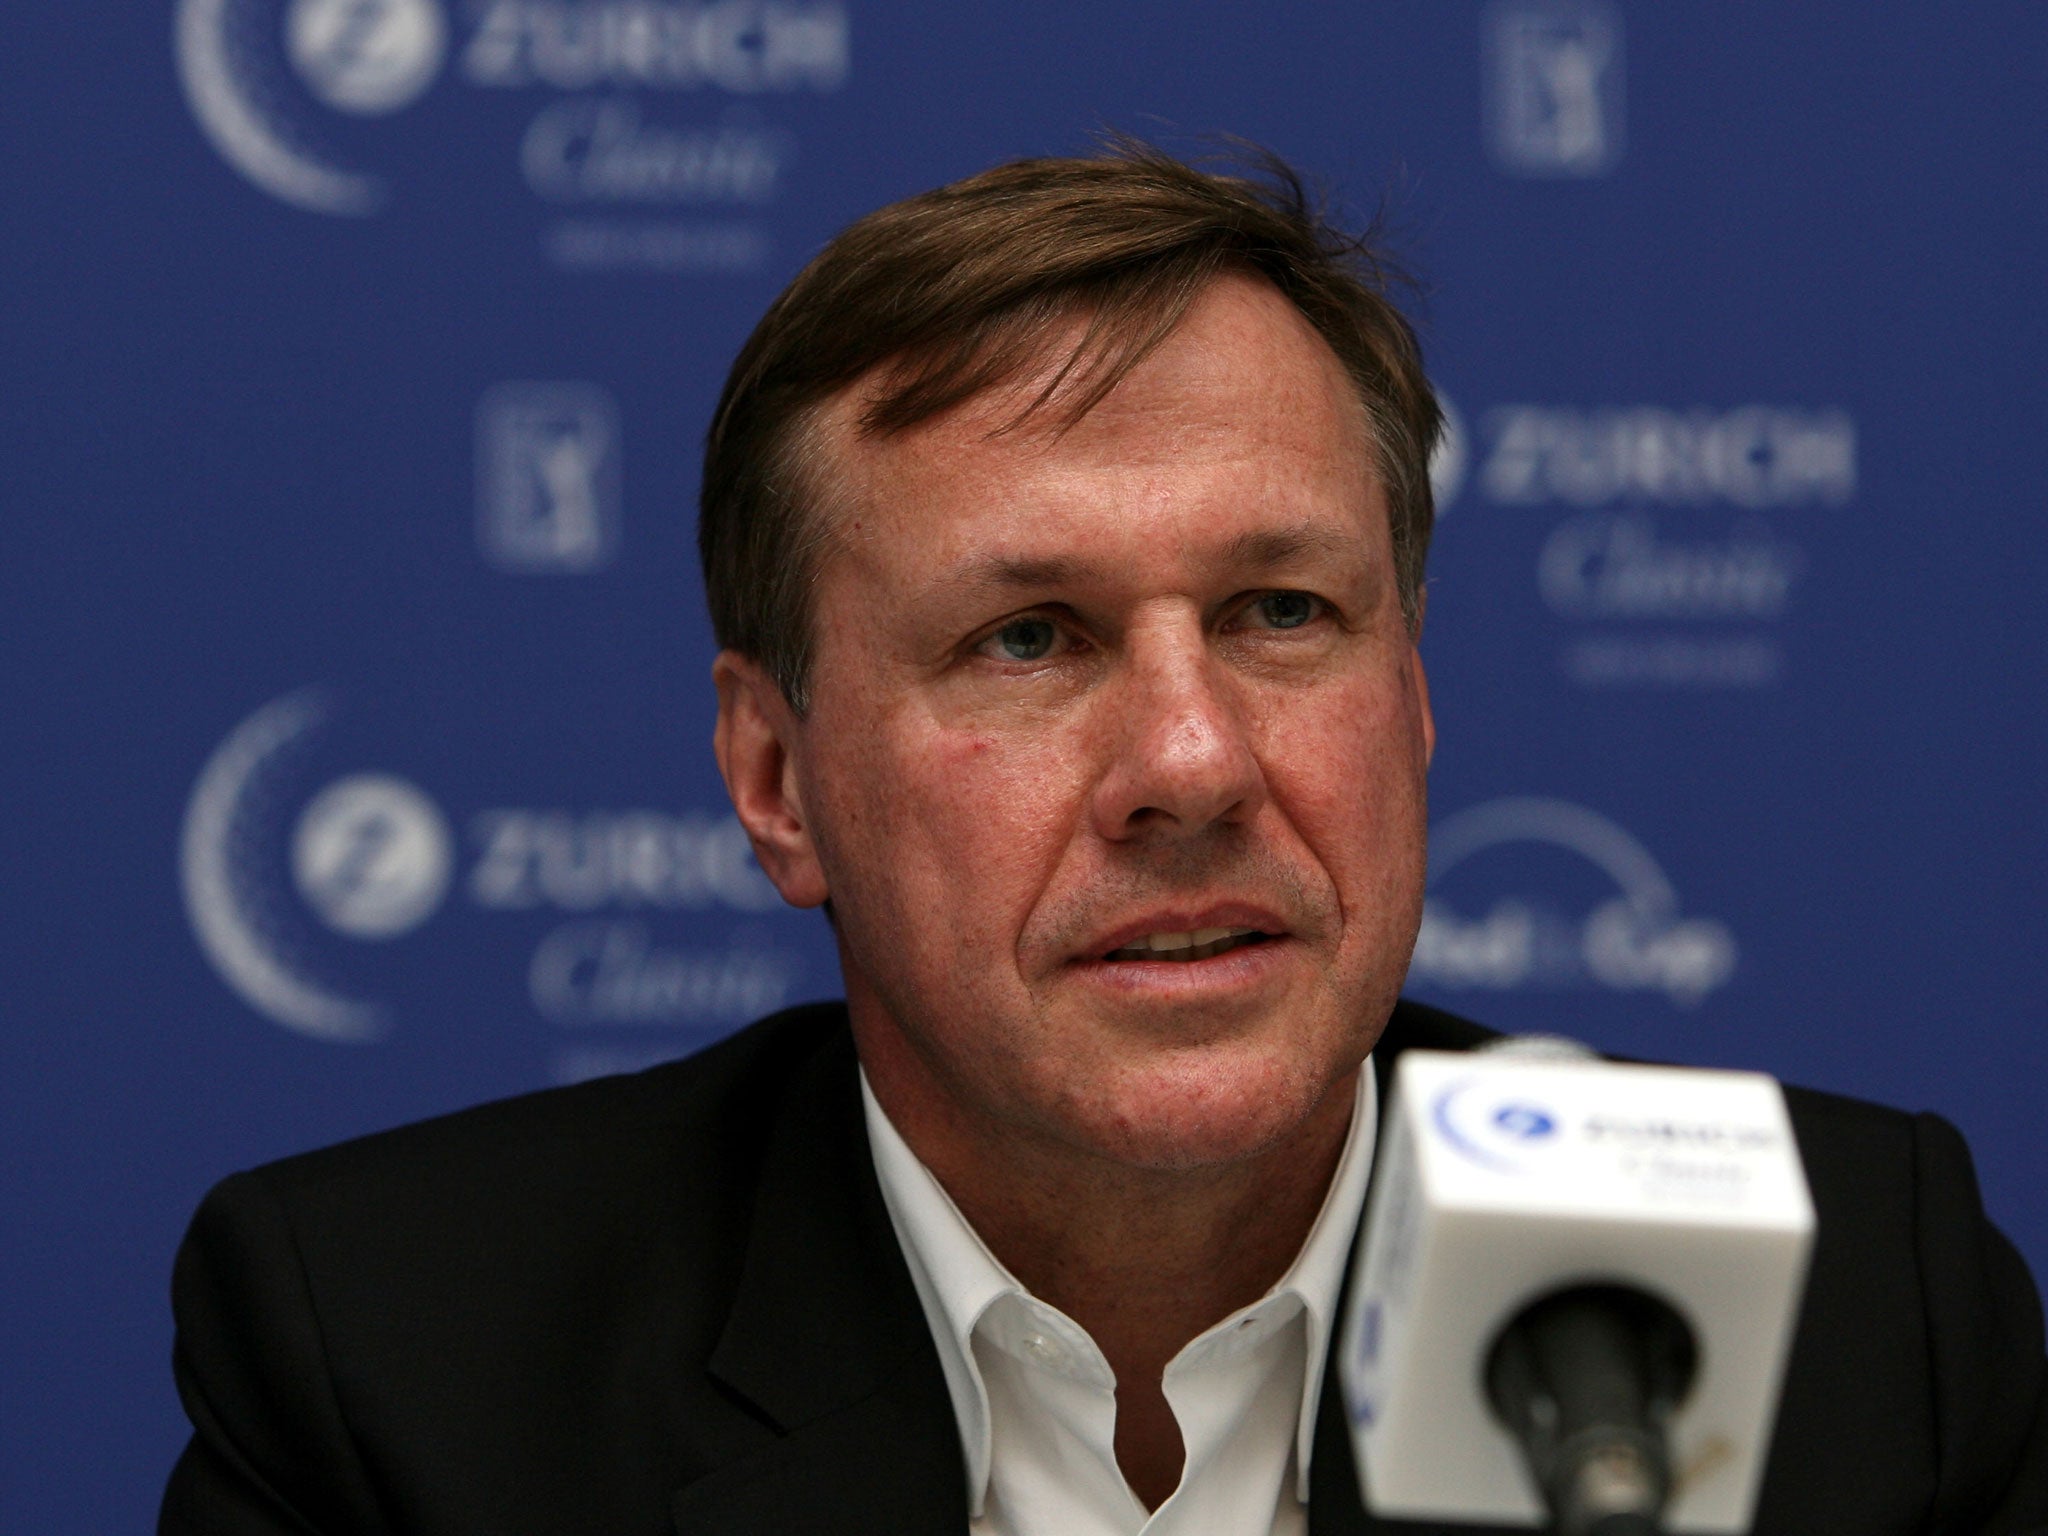 Zurich former CEO Martin Senn attends the announcement of Phase II of the PGA TOUR's Together, Anything's Possible charity initiative during a press conference at the TPC Louisiana during the Zurich Classic of New Orleans on April 21, 2010 in New Orleans, Louisiana